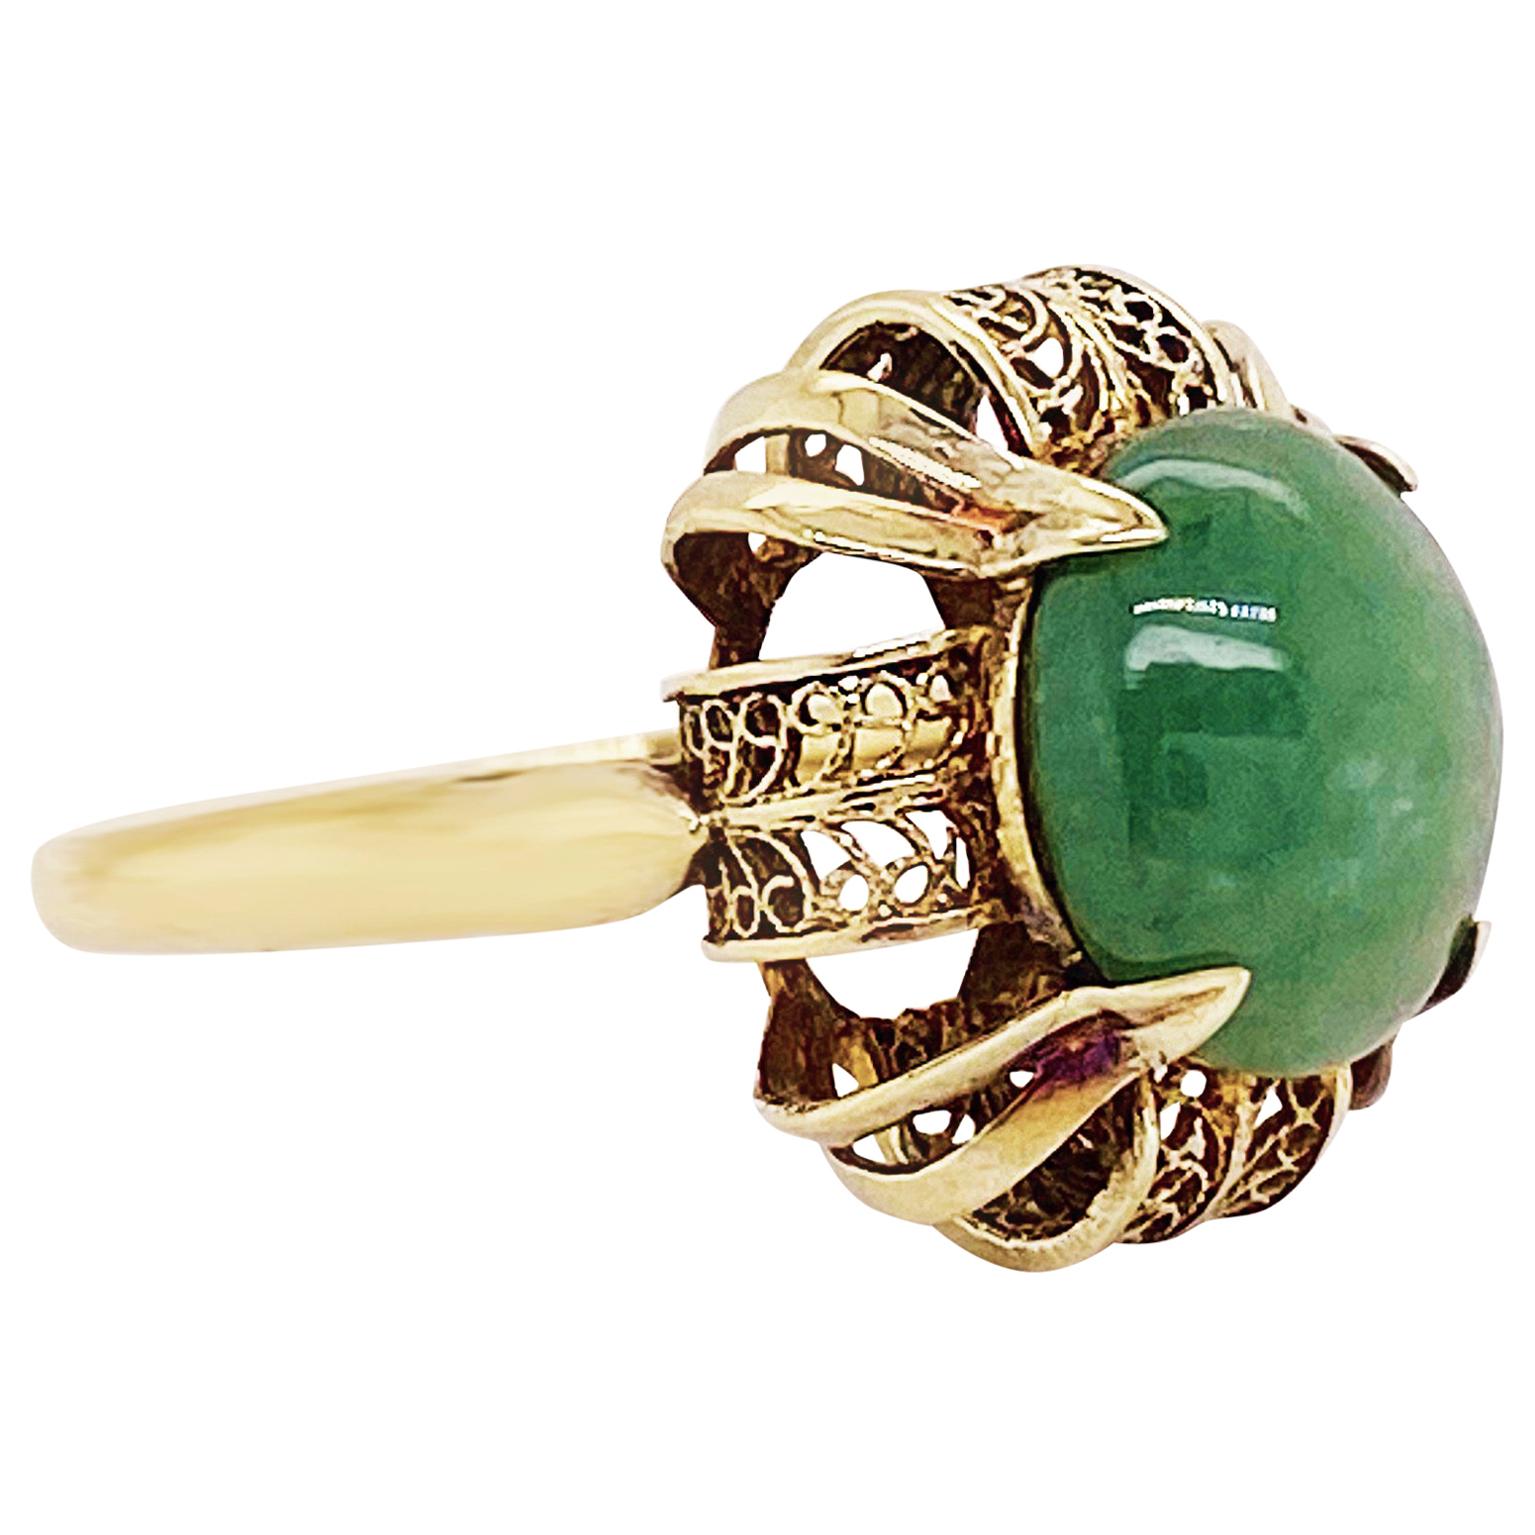 Jade Antique Ring, Jadeite Jade Ring in 14K Yellow Gold, Antique Filigree  Ring For Sale at 1stDibs | jade ring meaning, jade ring osrs, 14k gold jade  ring